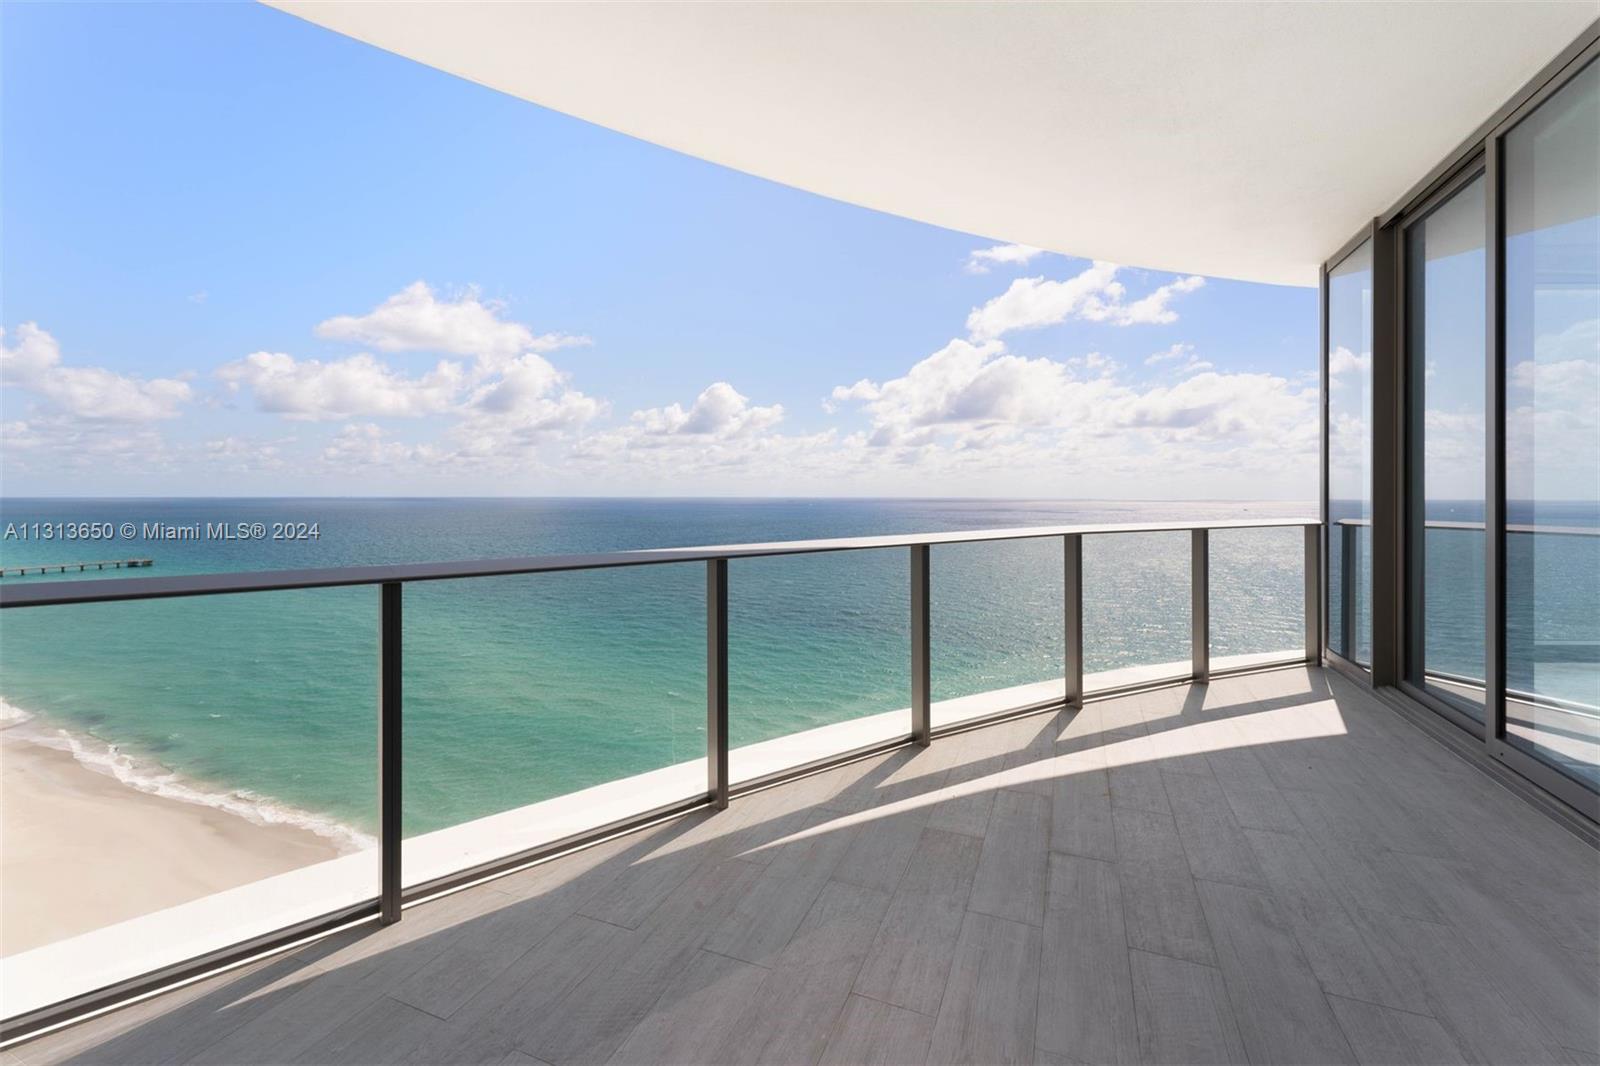 Beautiful 3 Bed plus Den in The Ritz-Carlton Residences in Sunny Isles Beach. Unobstructed Ocean and Intracostal views. Spacious flow-thru unit. 3,080 SQ SF of living area with 10ft ceilings, an Italian-designed kitchen fully equipped with Gaggenau appliances, Caesarstone quartz countertop, wine cooler, built-in cappuccino maker, etc. Exceptional amenities include a 24hr Concierge, valet, gym & Spa, sunrise & sunset pools, 250 linear ft. of private beach, restaurant & beach garden, kid’s club, and a breathtaking 33rd floor Club level. Vacant, easy to show.